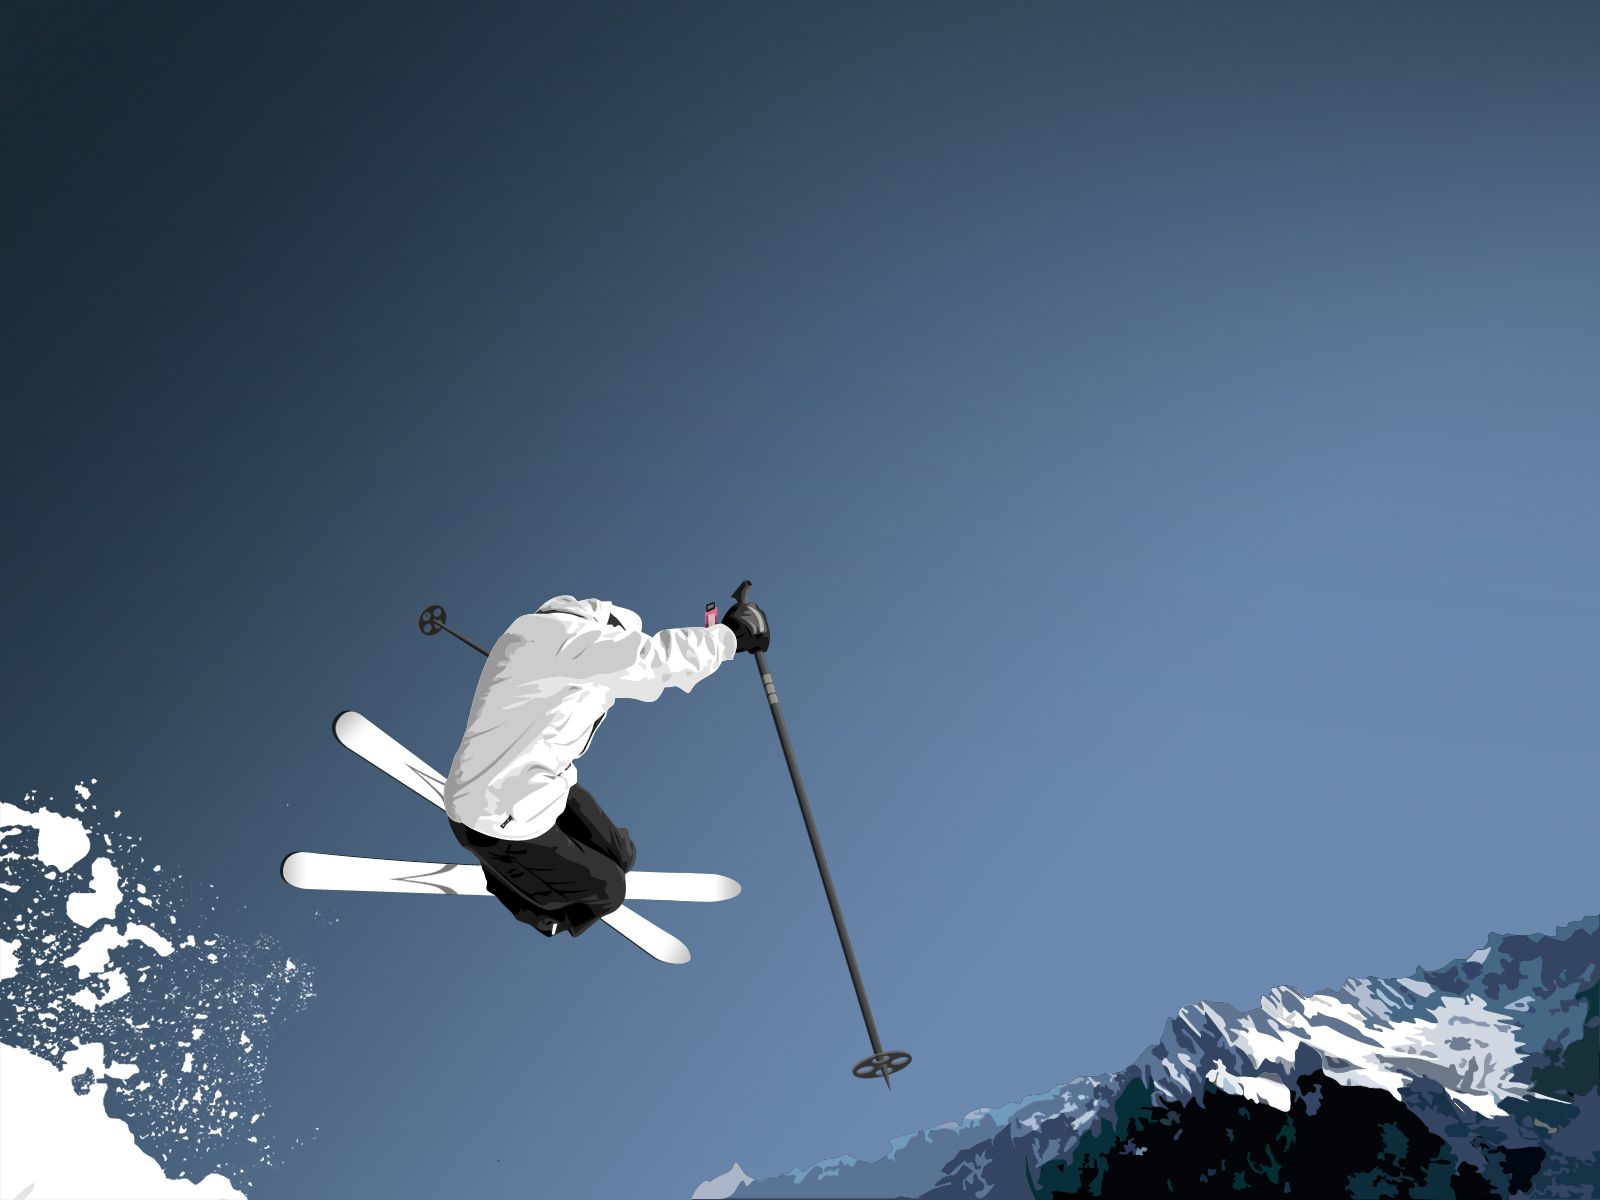 Jumping ski snow wallpaper - (#171492) - High Quality and ...